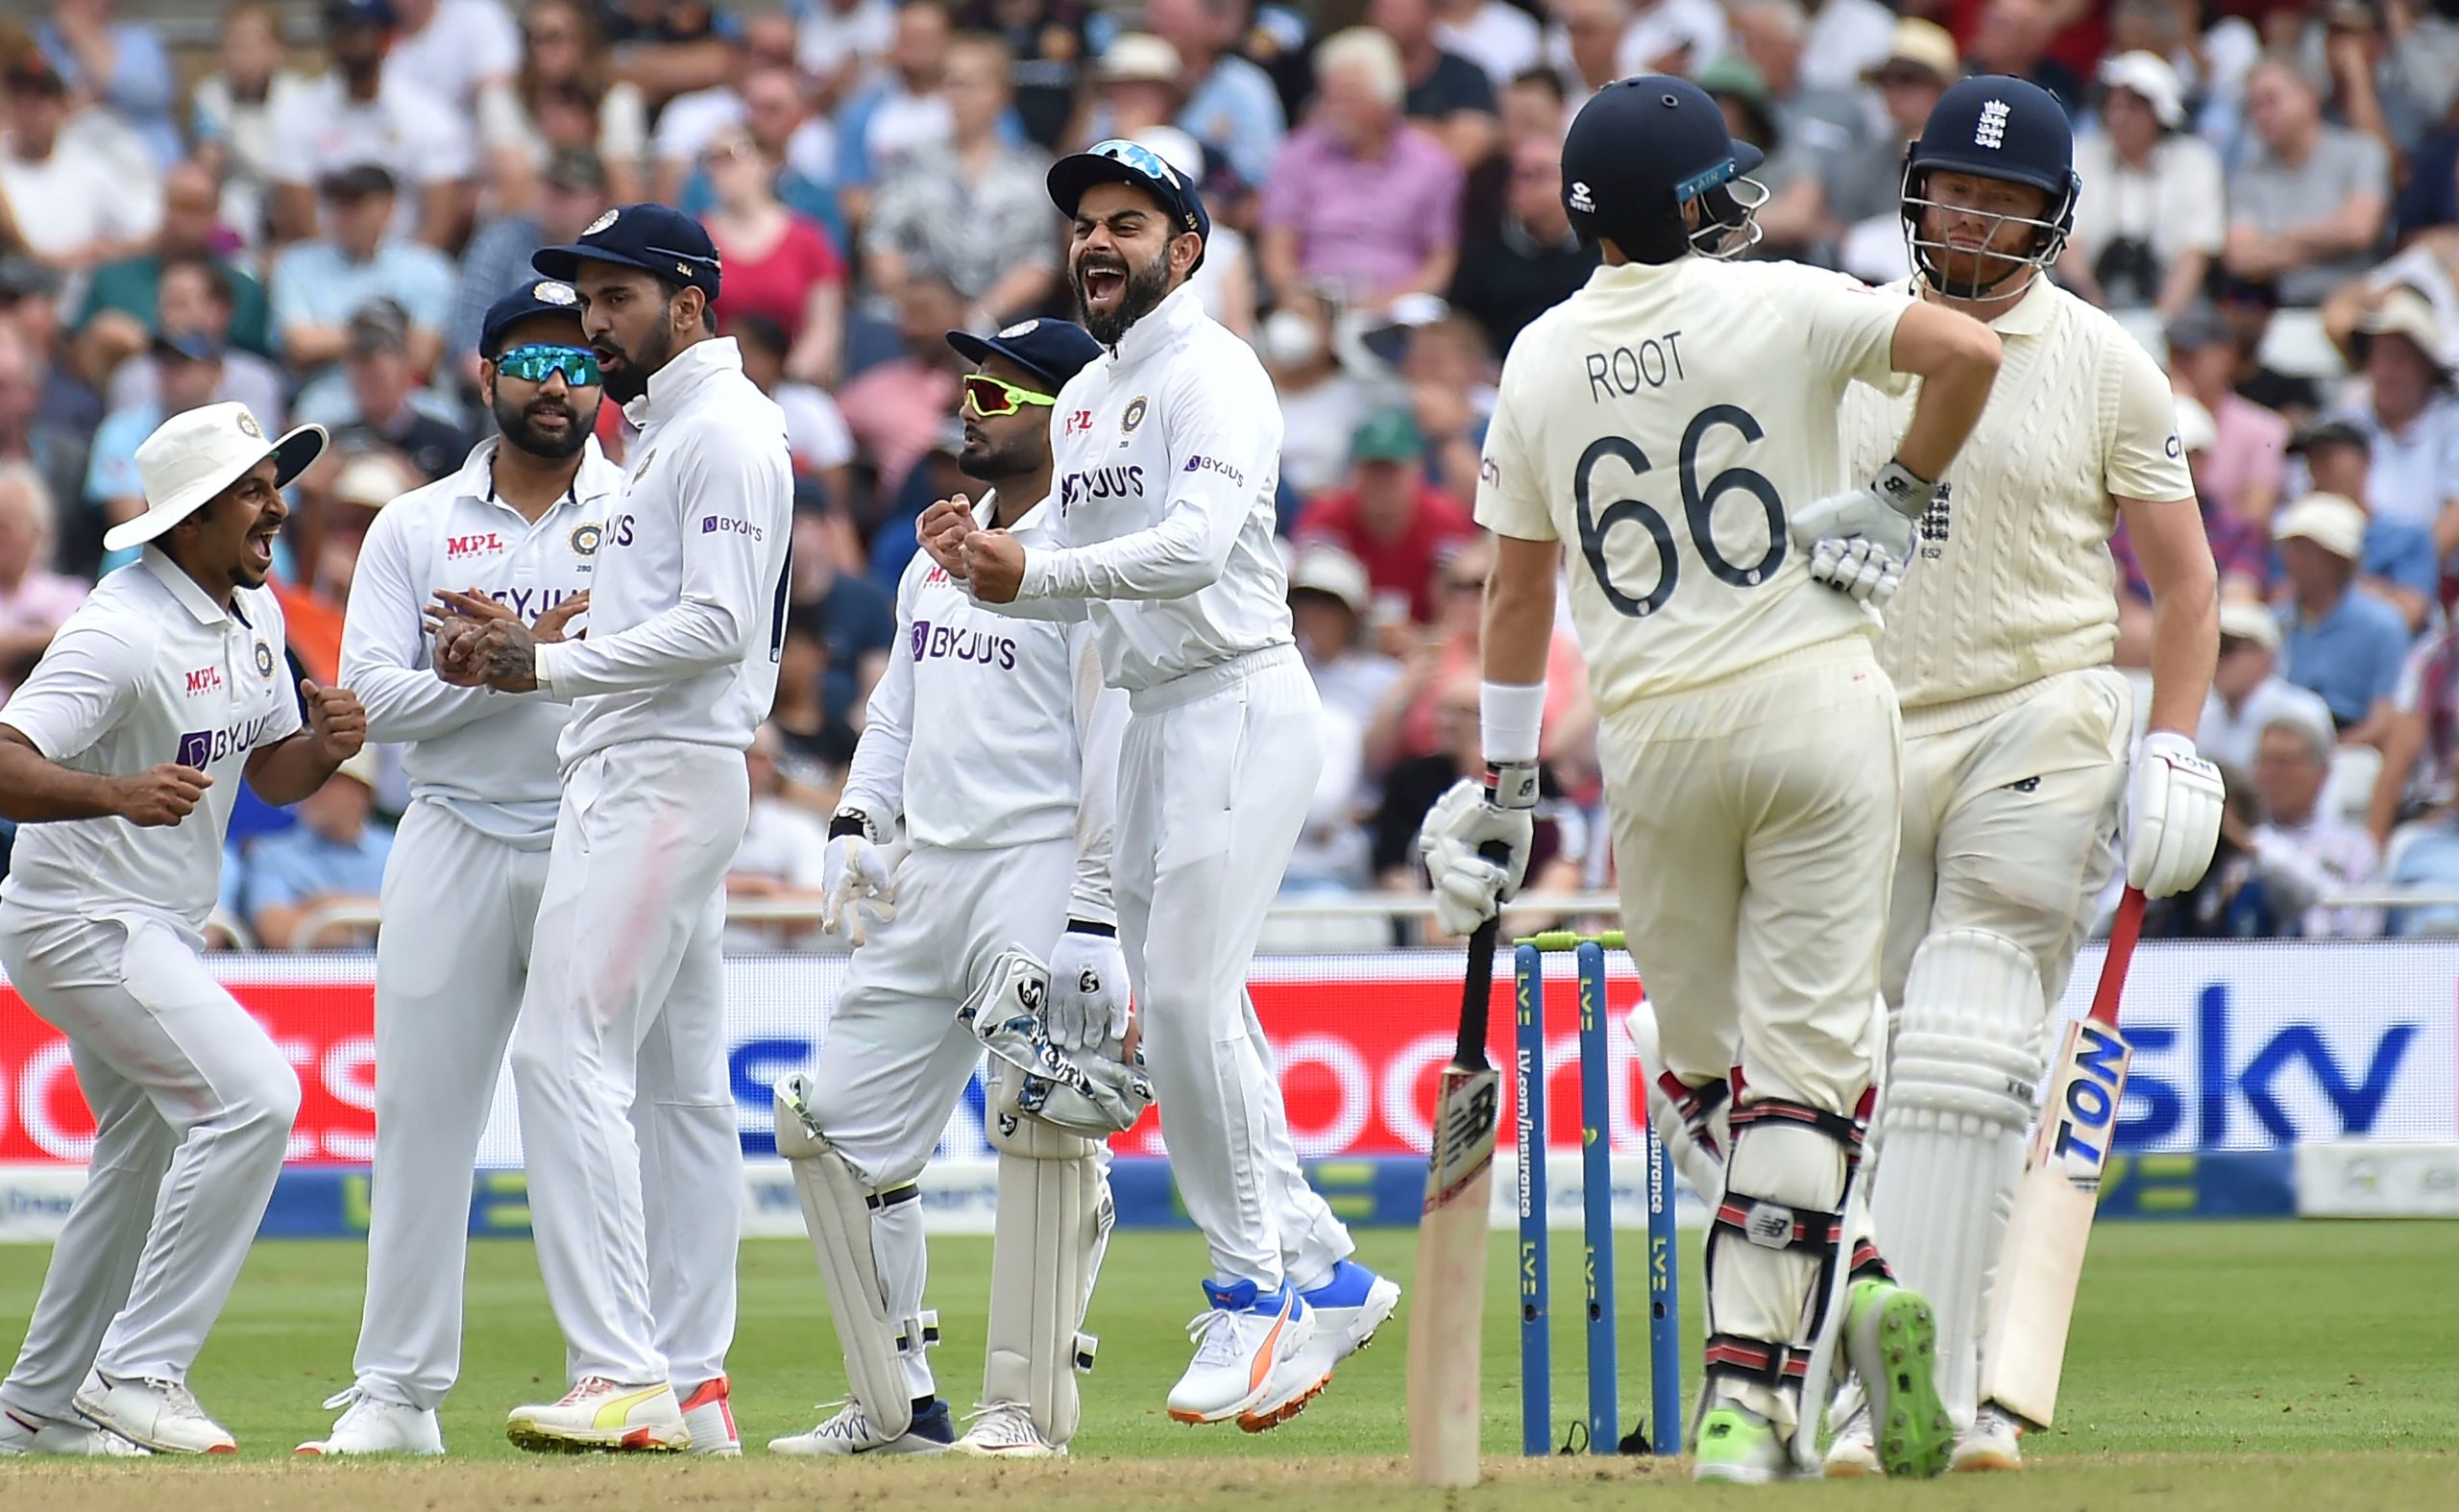 1st Test: India in the driver’s seat against England after Day 1